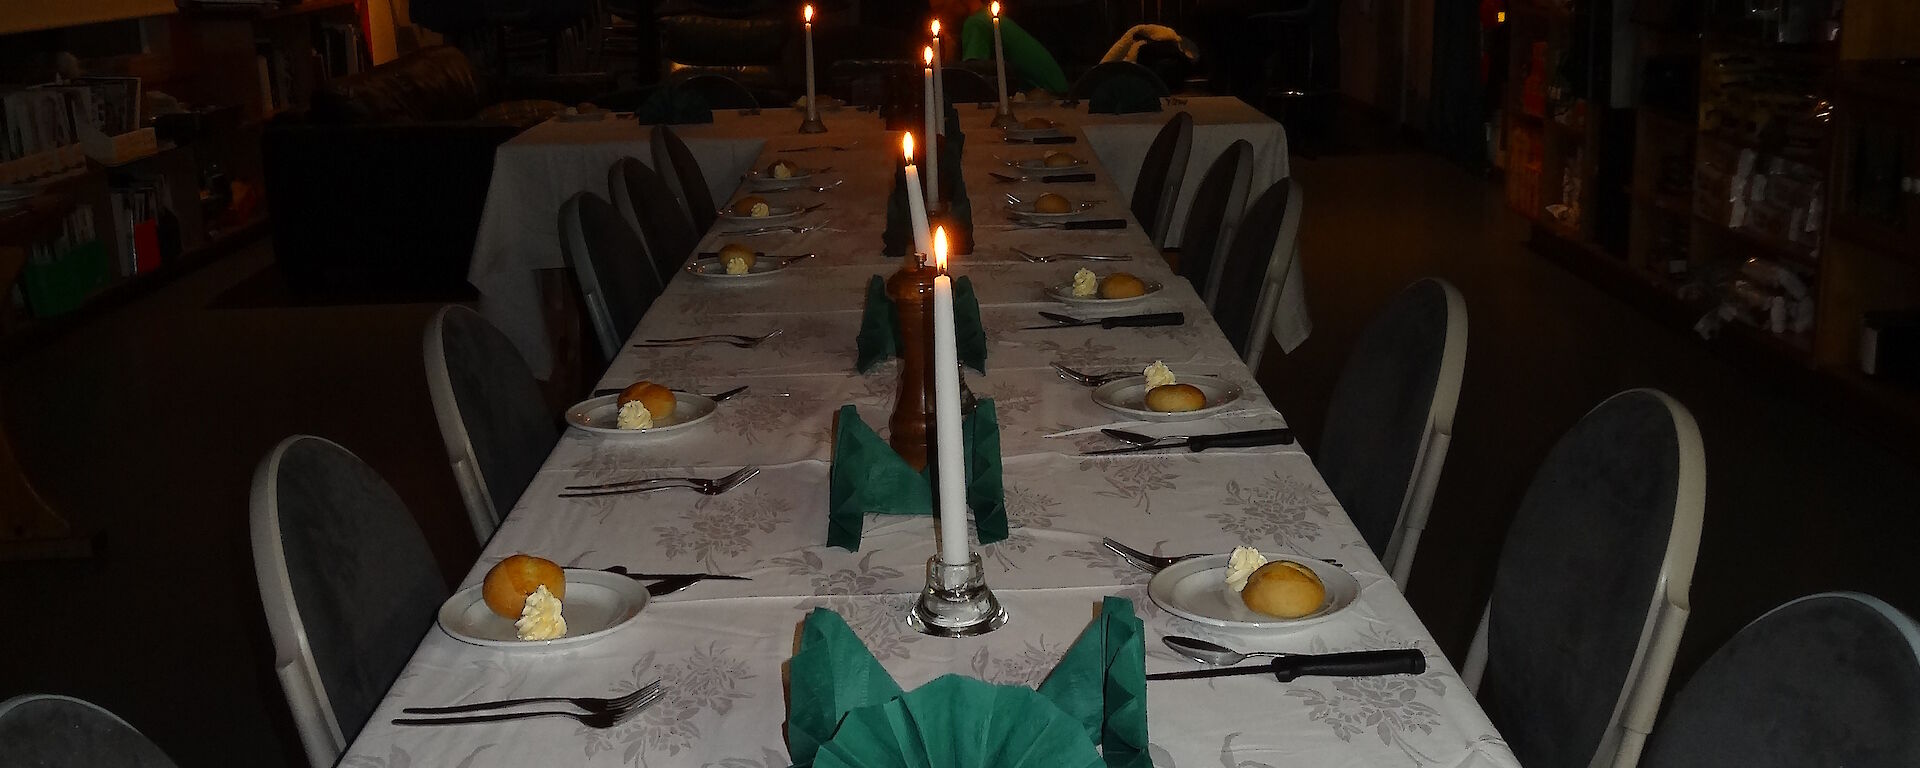 Table set for dinner white table cloth candles a side plate with a bread roll and butter